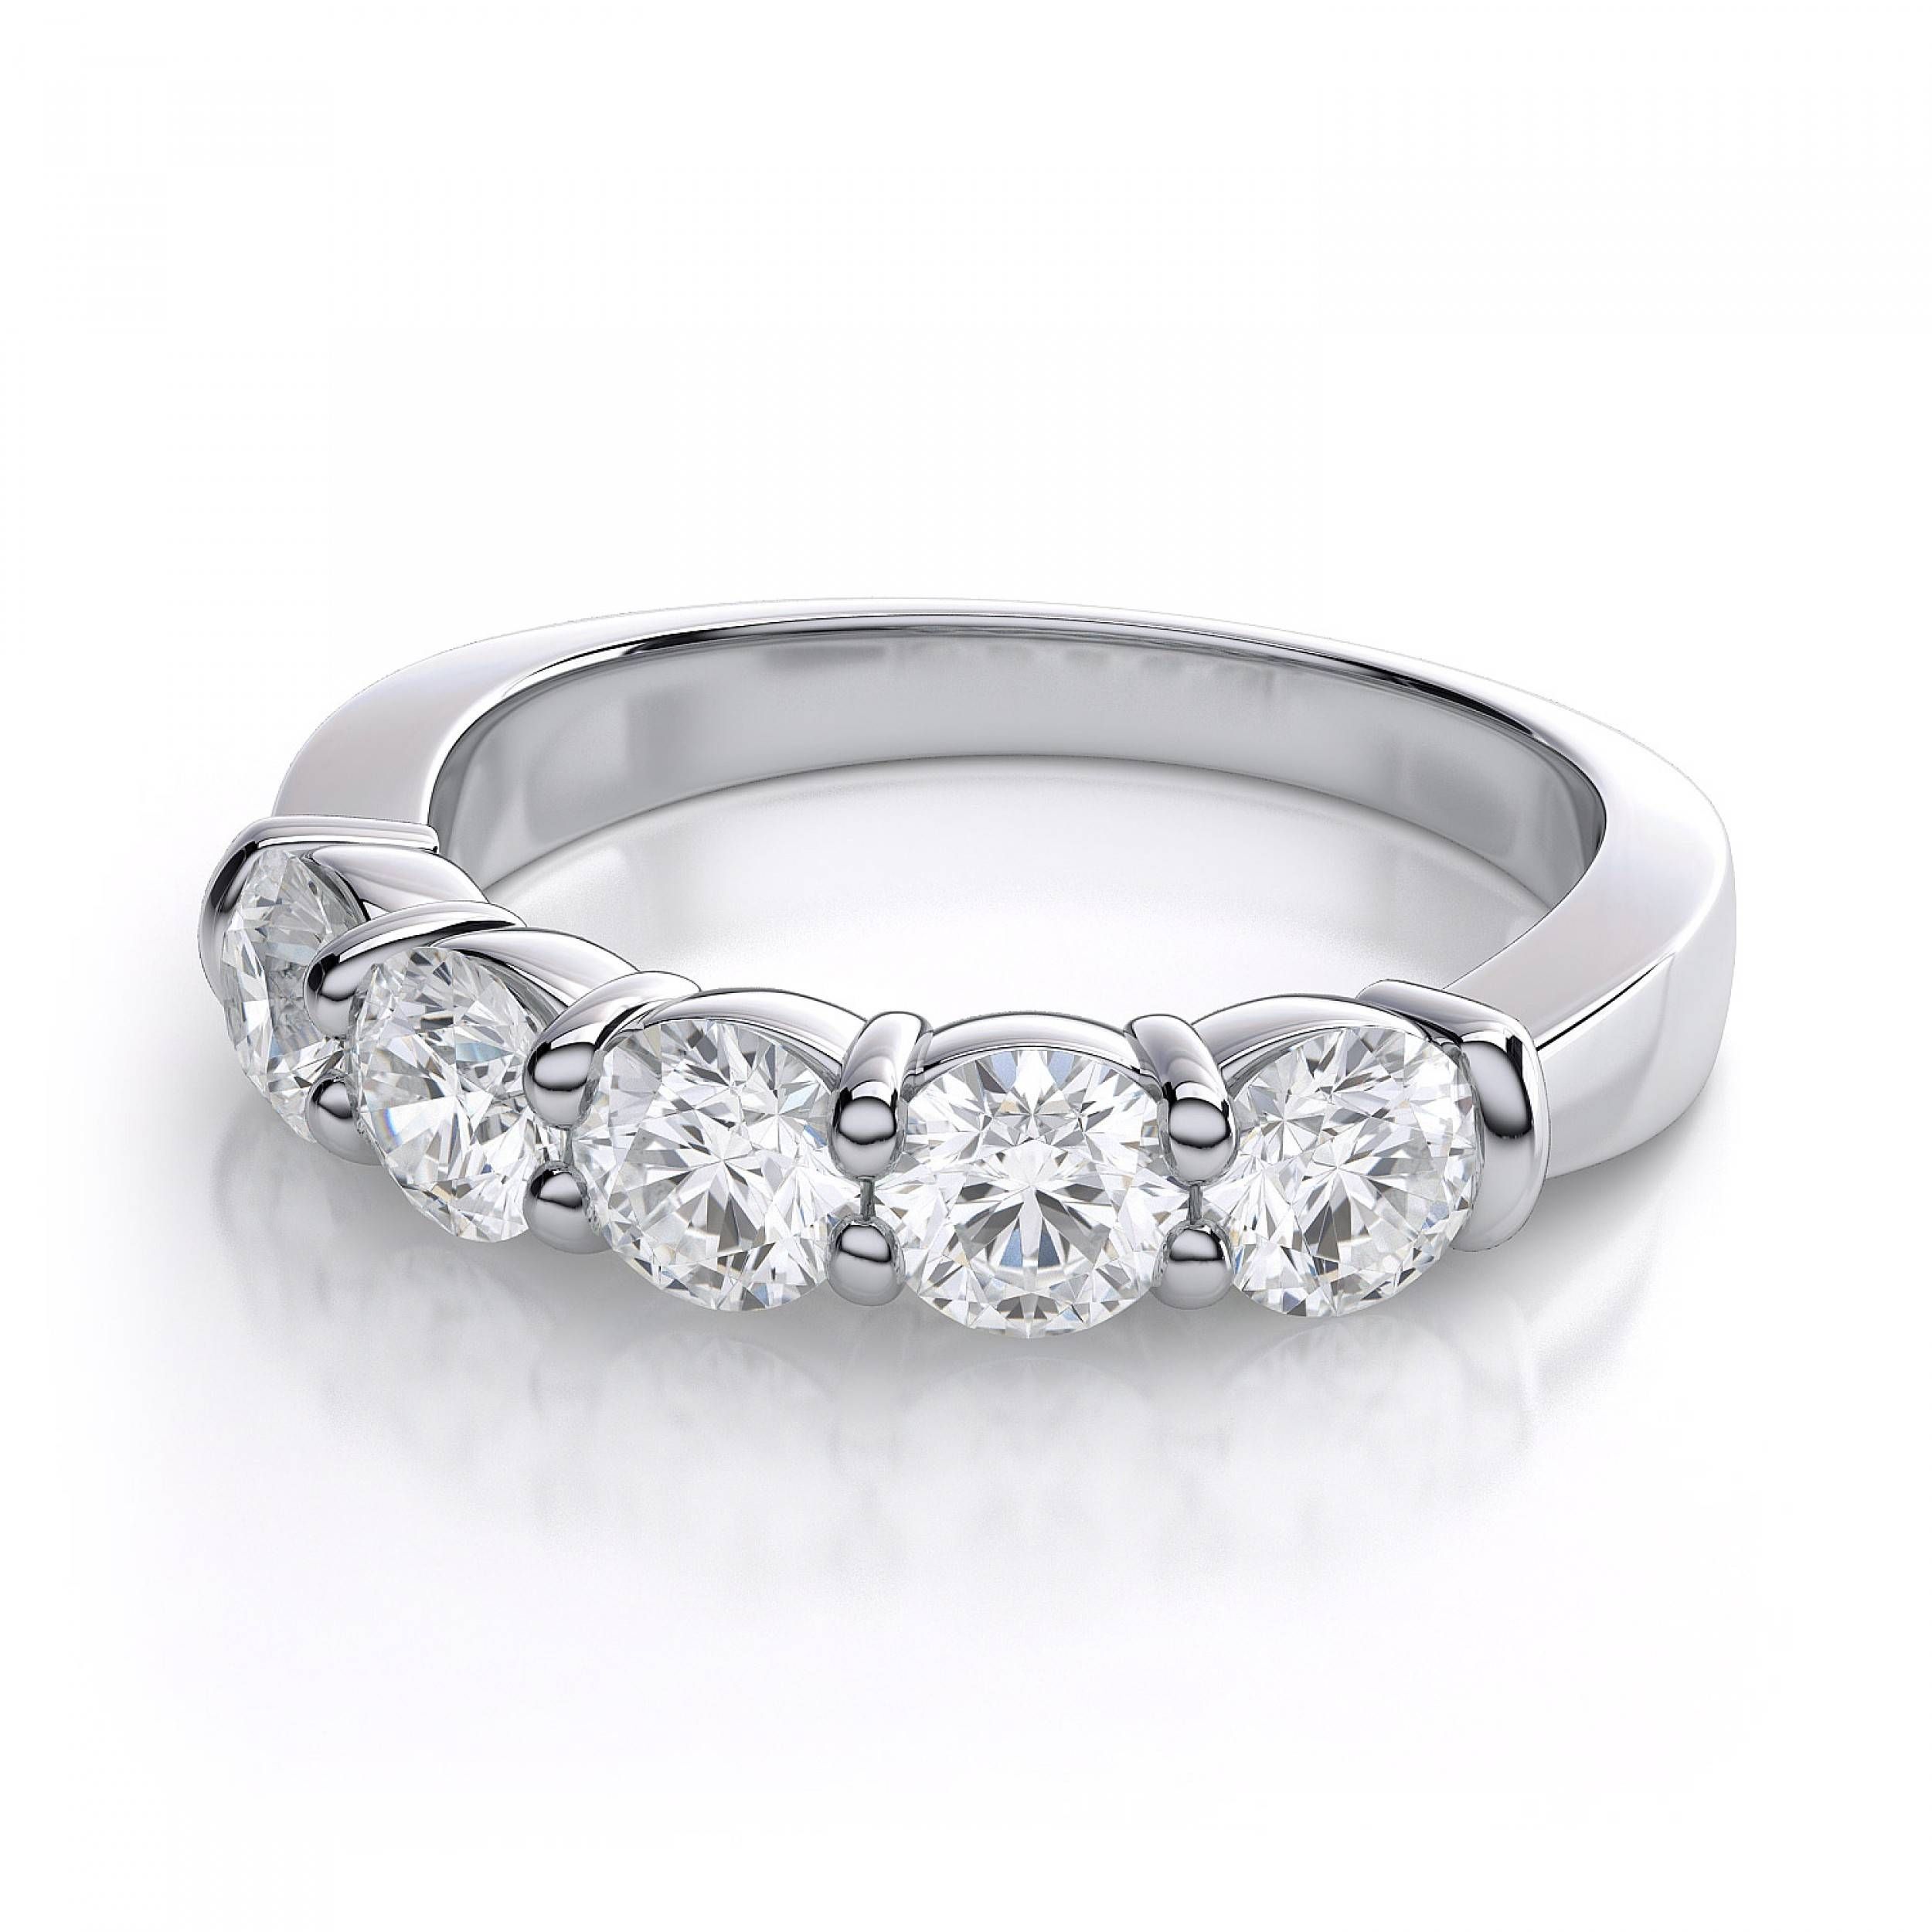 Wedding Rings : Diamond Anniversary Bands Anniversary Rings For Inside Best And Newest Diamond Anniversary Rings For Her (View 21 of 25)